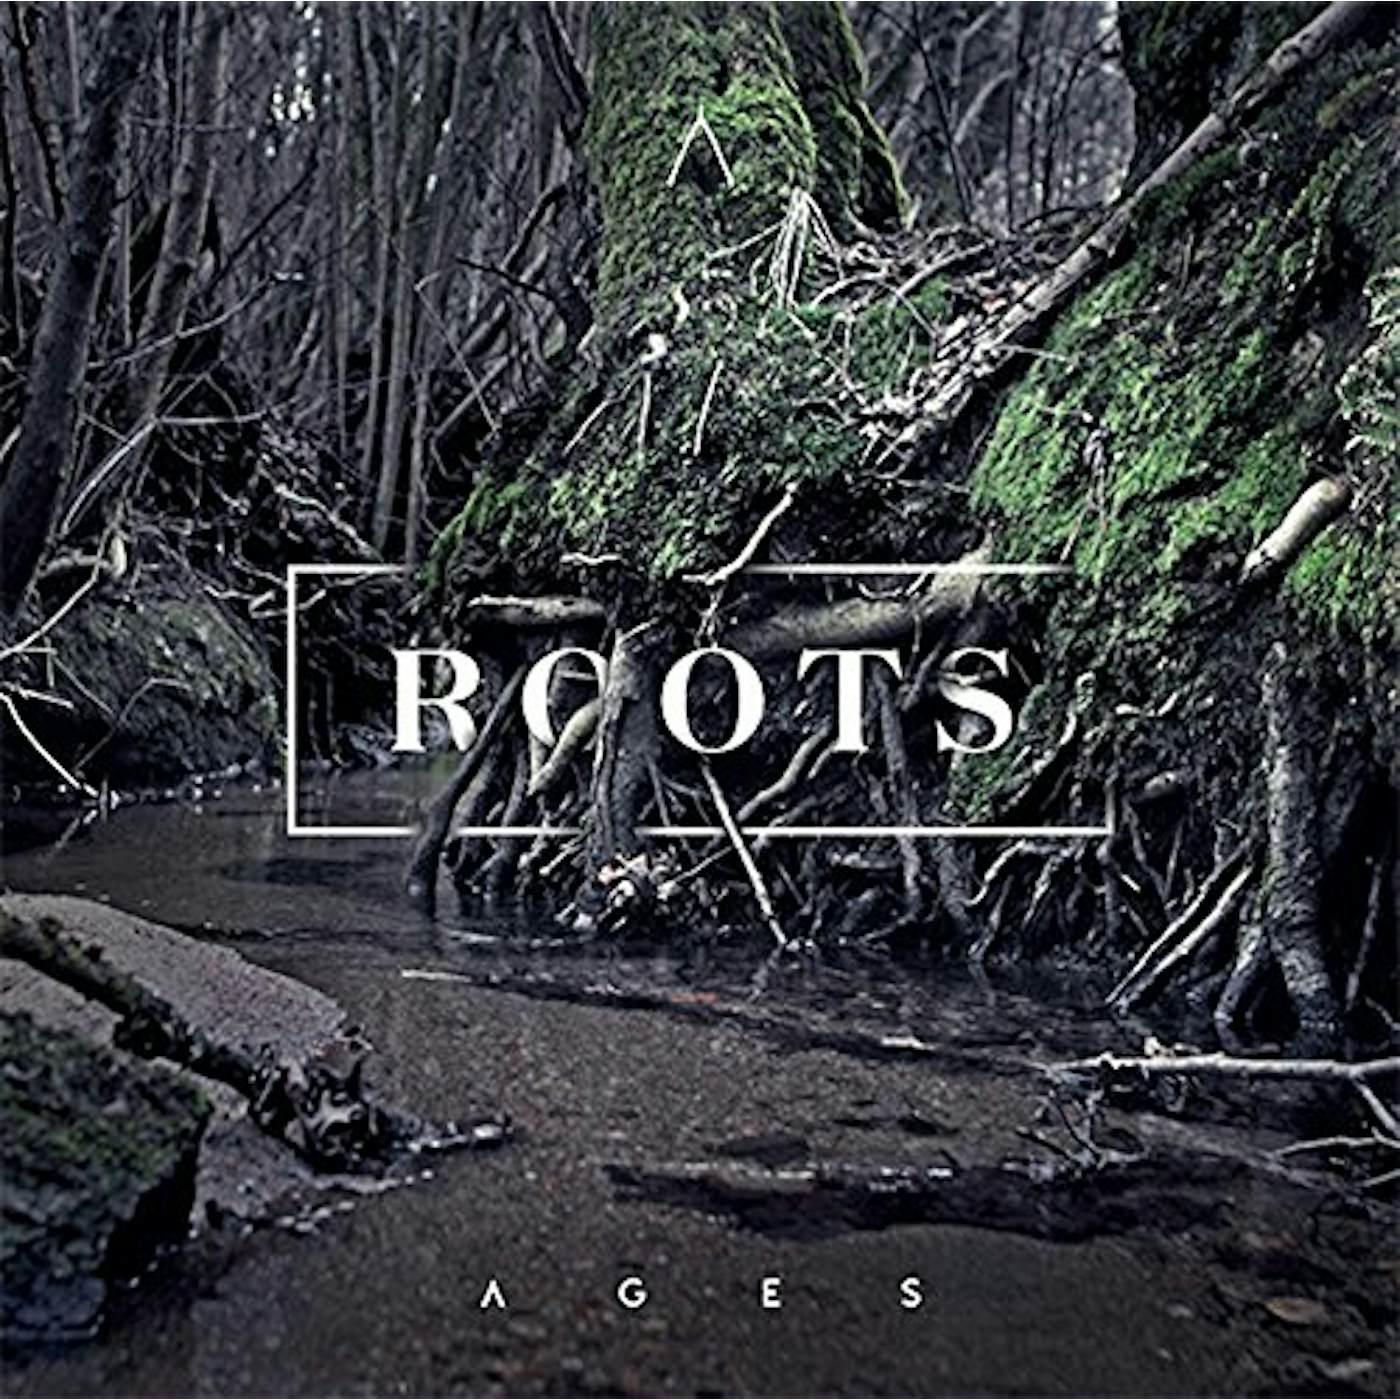 Ages ROOTS CD